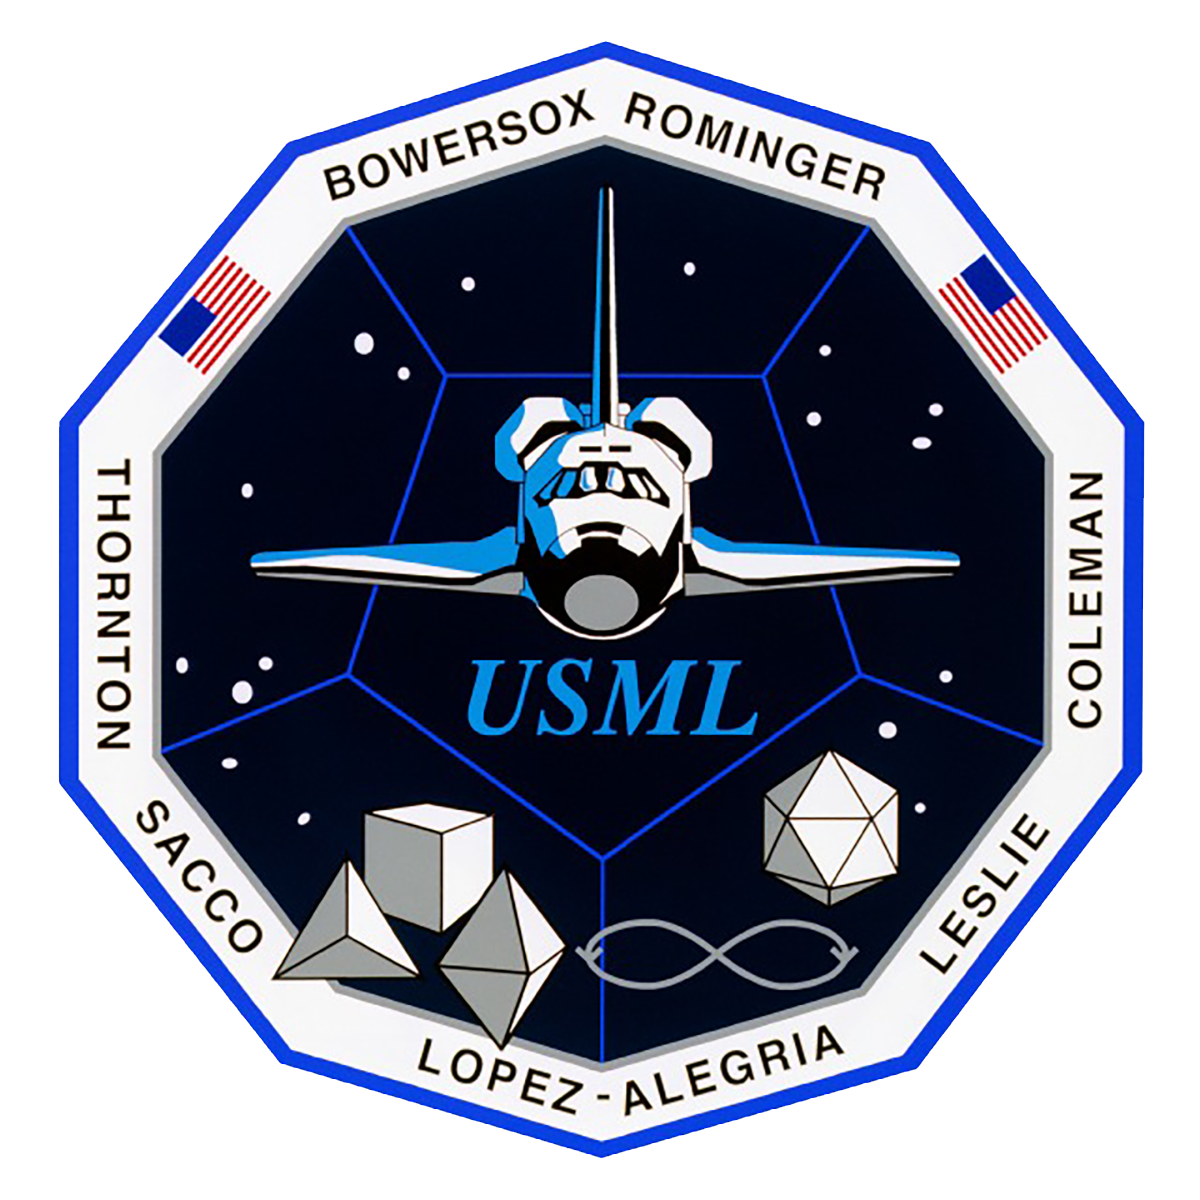 STS-73 (Columbia)